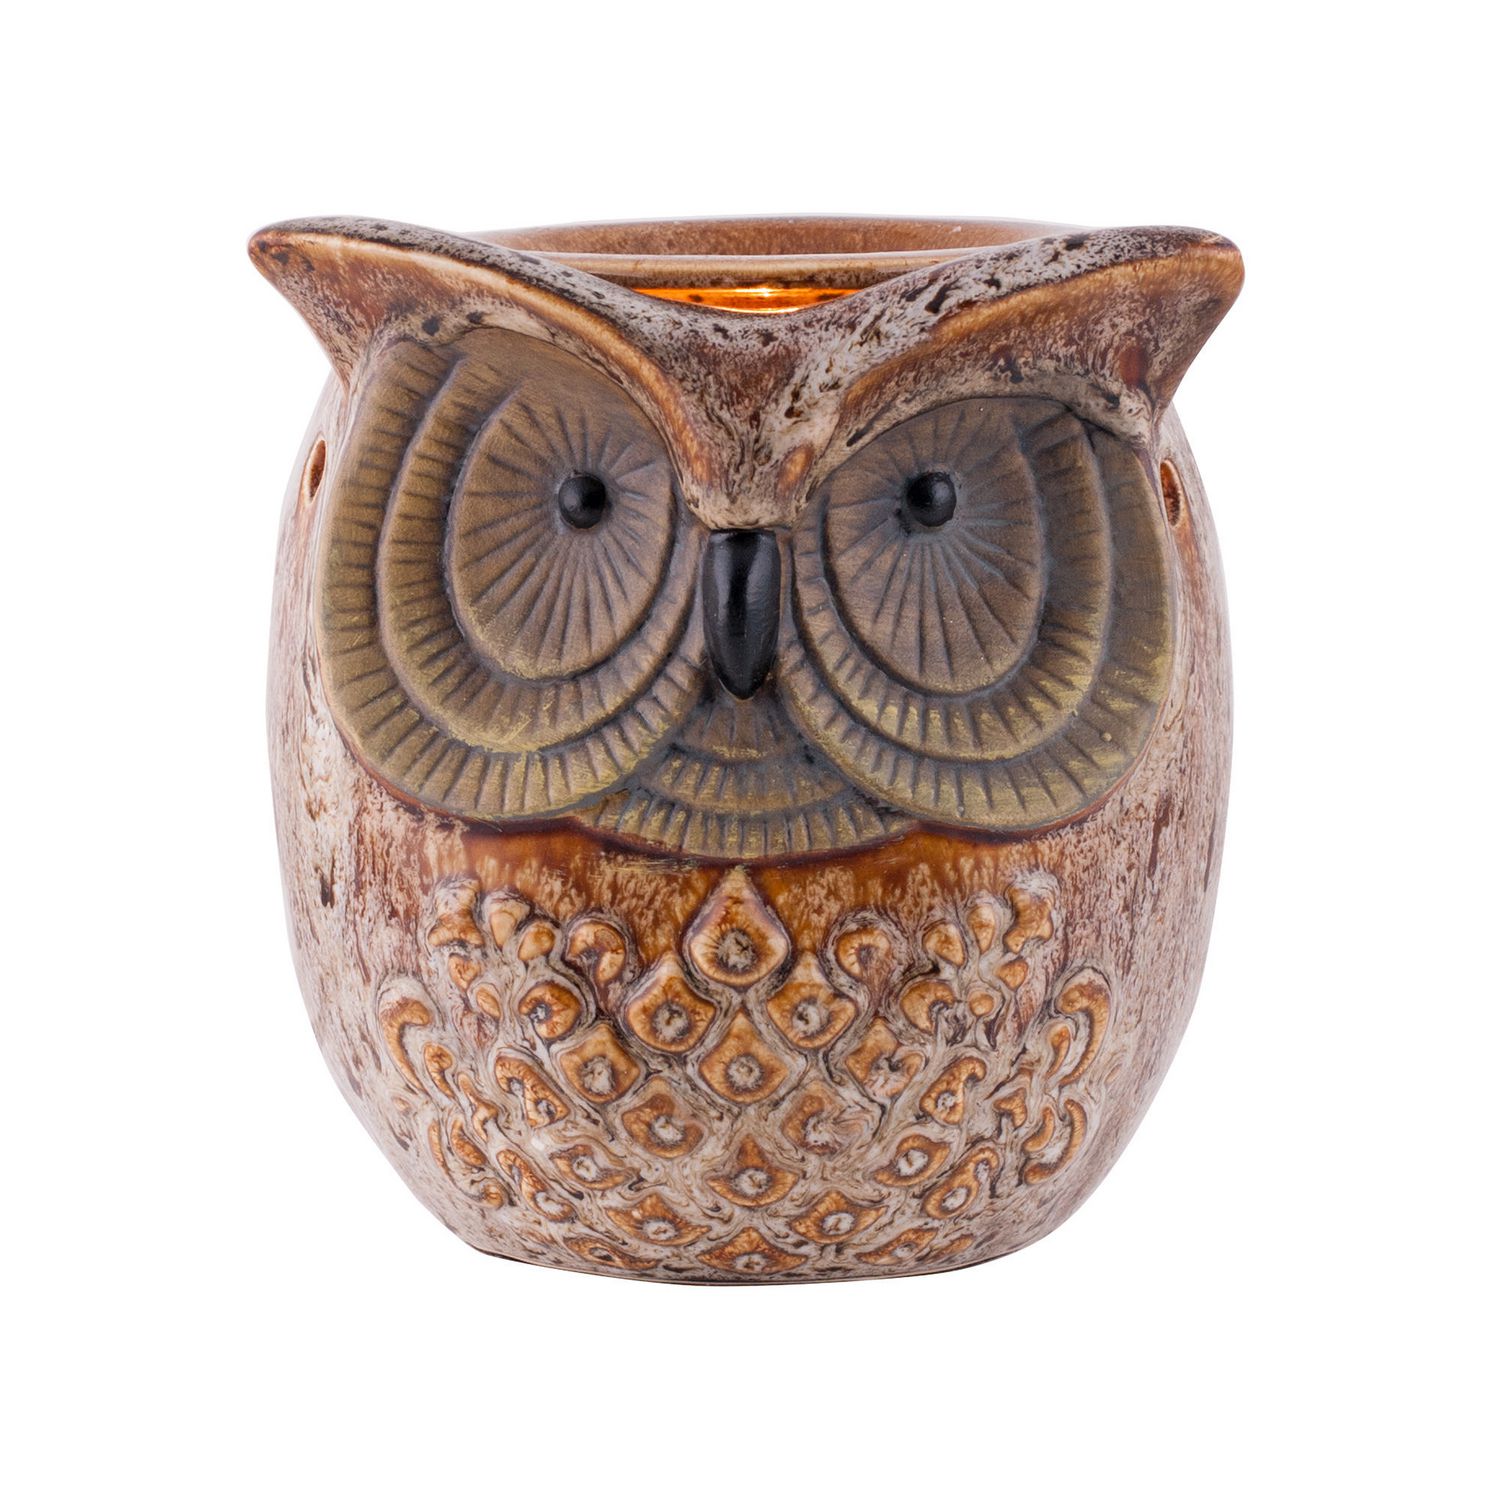 owl candle melter